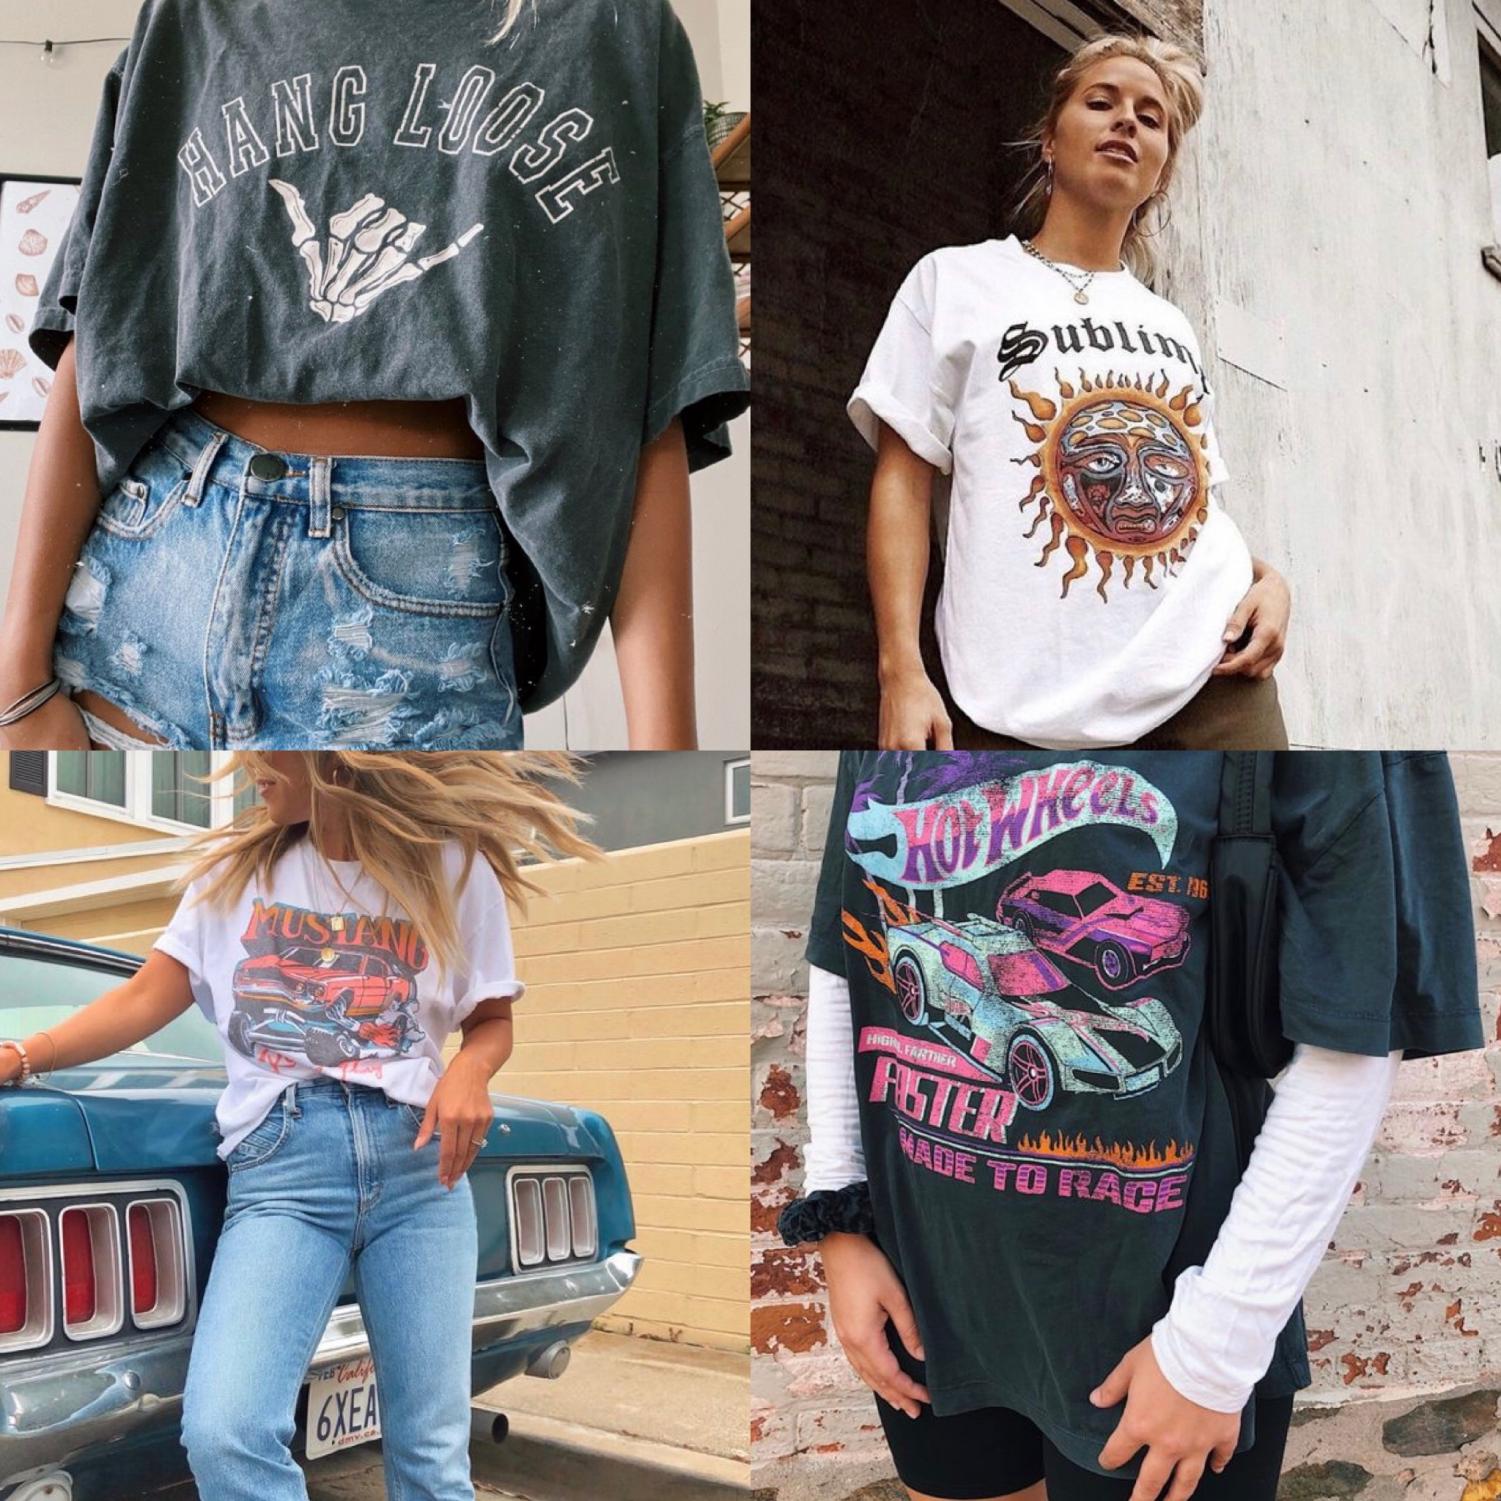 What Outfits Were Popular In The 90s